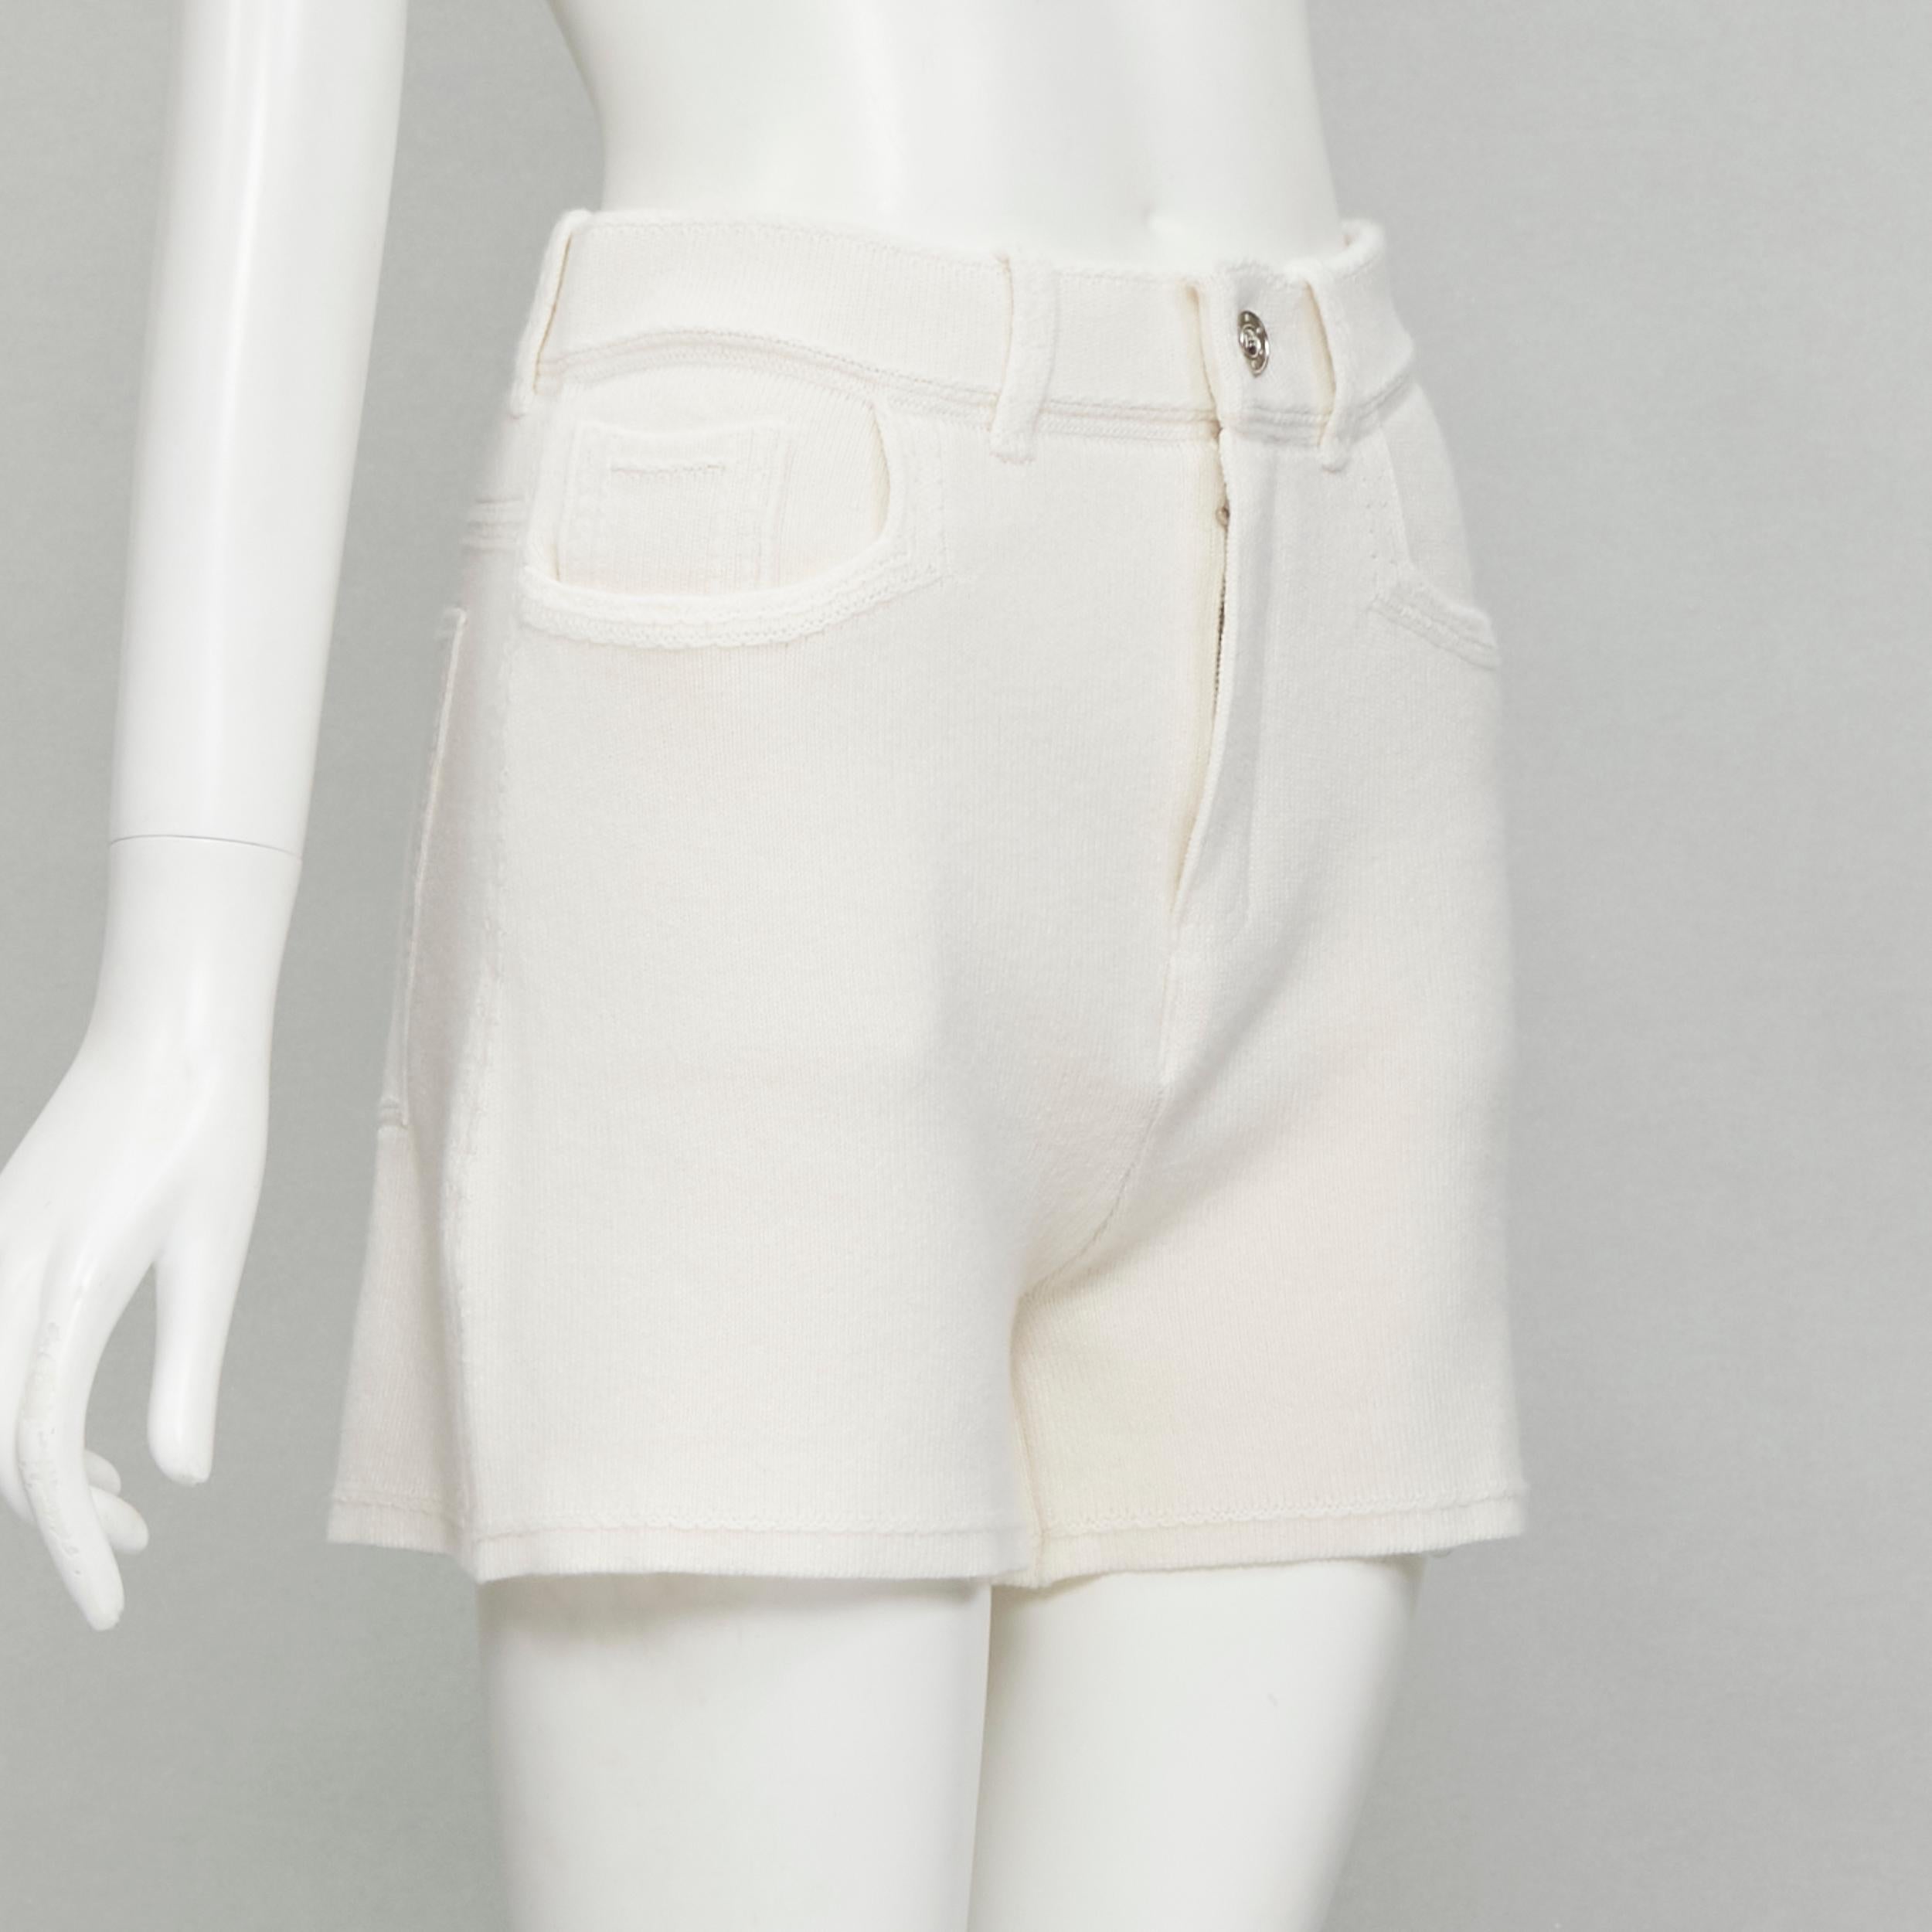 new BARRIE Denim Suit cashmere cotton knit ivory shorts M
Brand: Barrie
Extra Detail: 64% cashmere, 46% cotton. Denim jeans inspired design. 5-pocket design. Zip fly closure.

CONDITION:
Condition: New with tags. 

SIZING:
Designer Size: